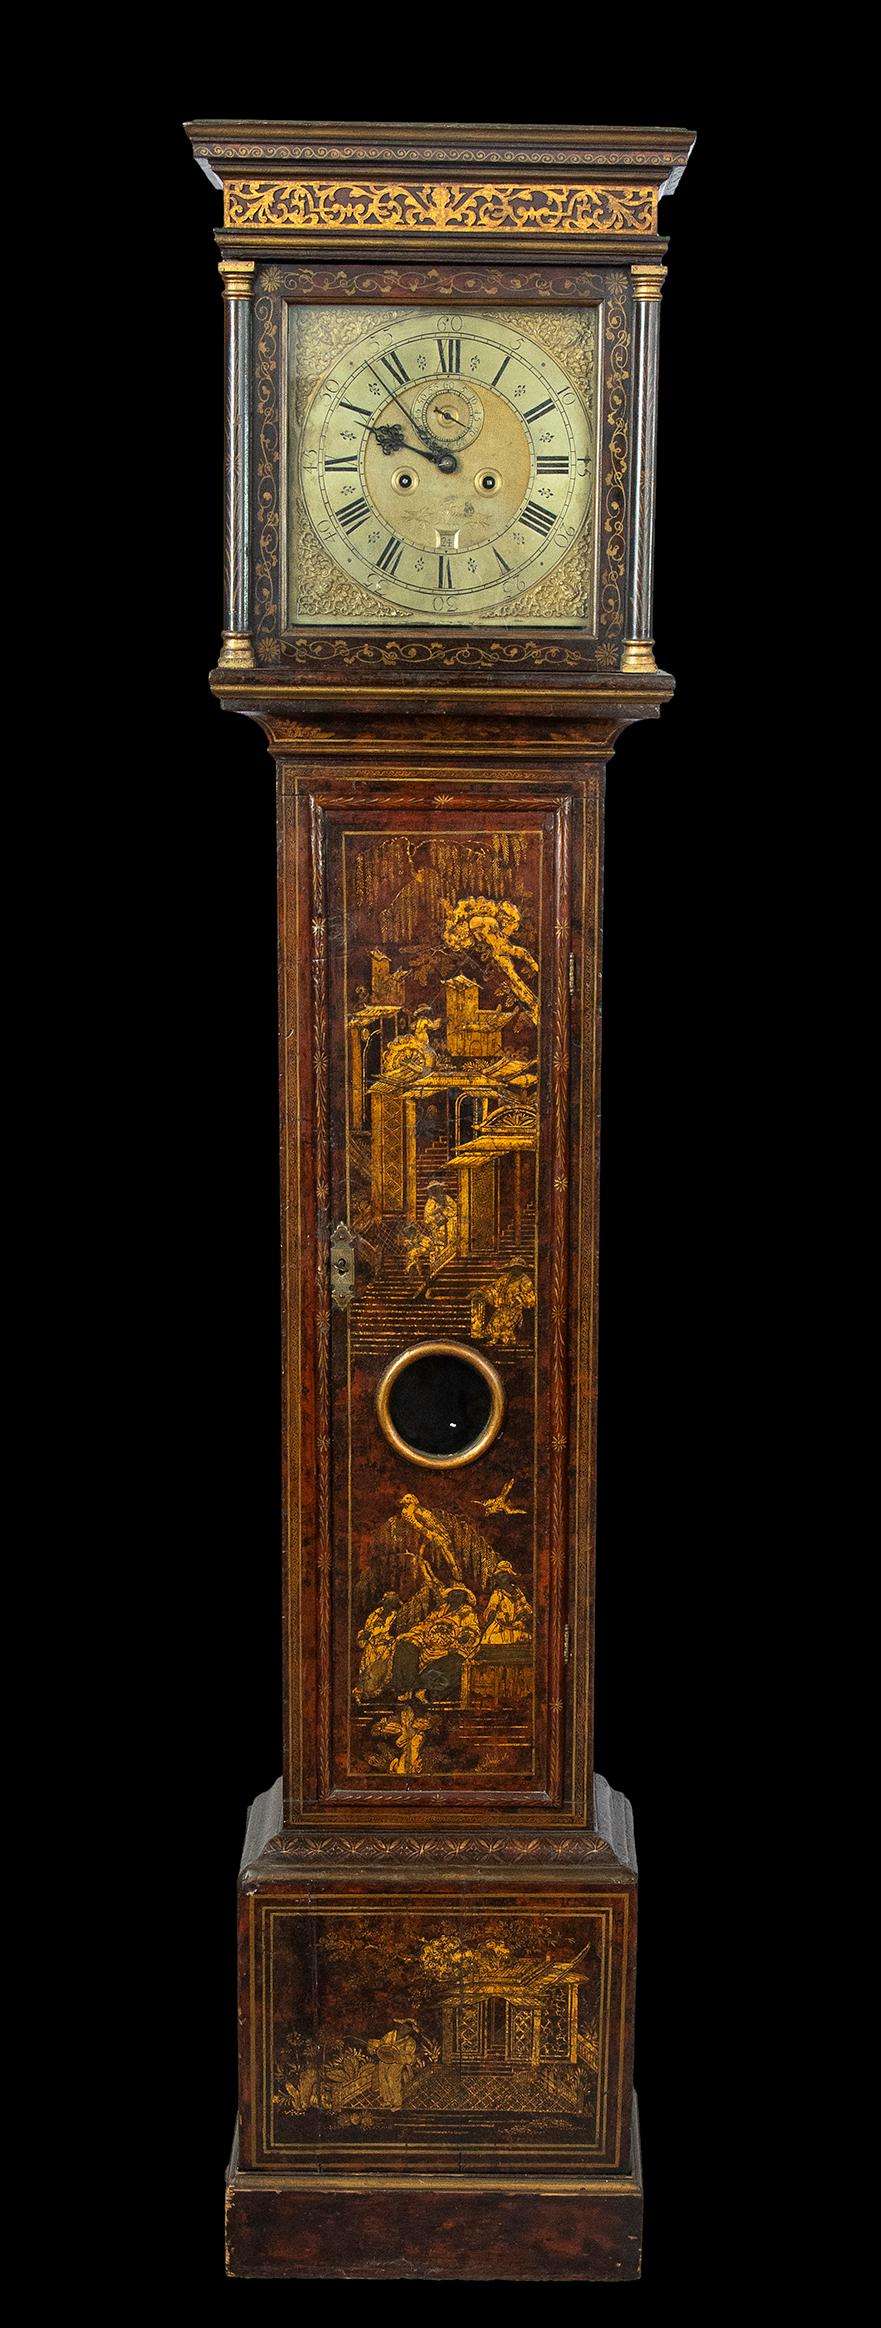 Fantastic late 17th century English clock, black and red lacquered, with gold chinoiserie figures, mechanism untested but in good order. Small flaws, but a watch over 300 years old can be forgiven....